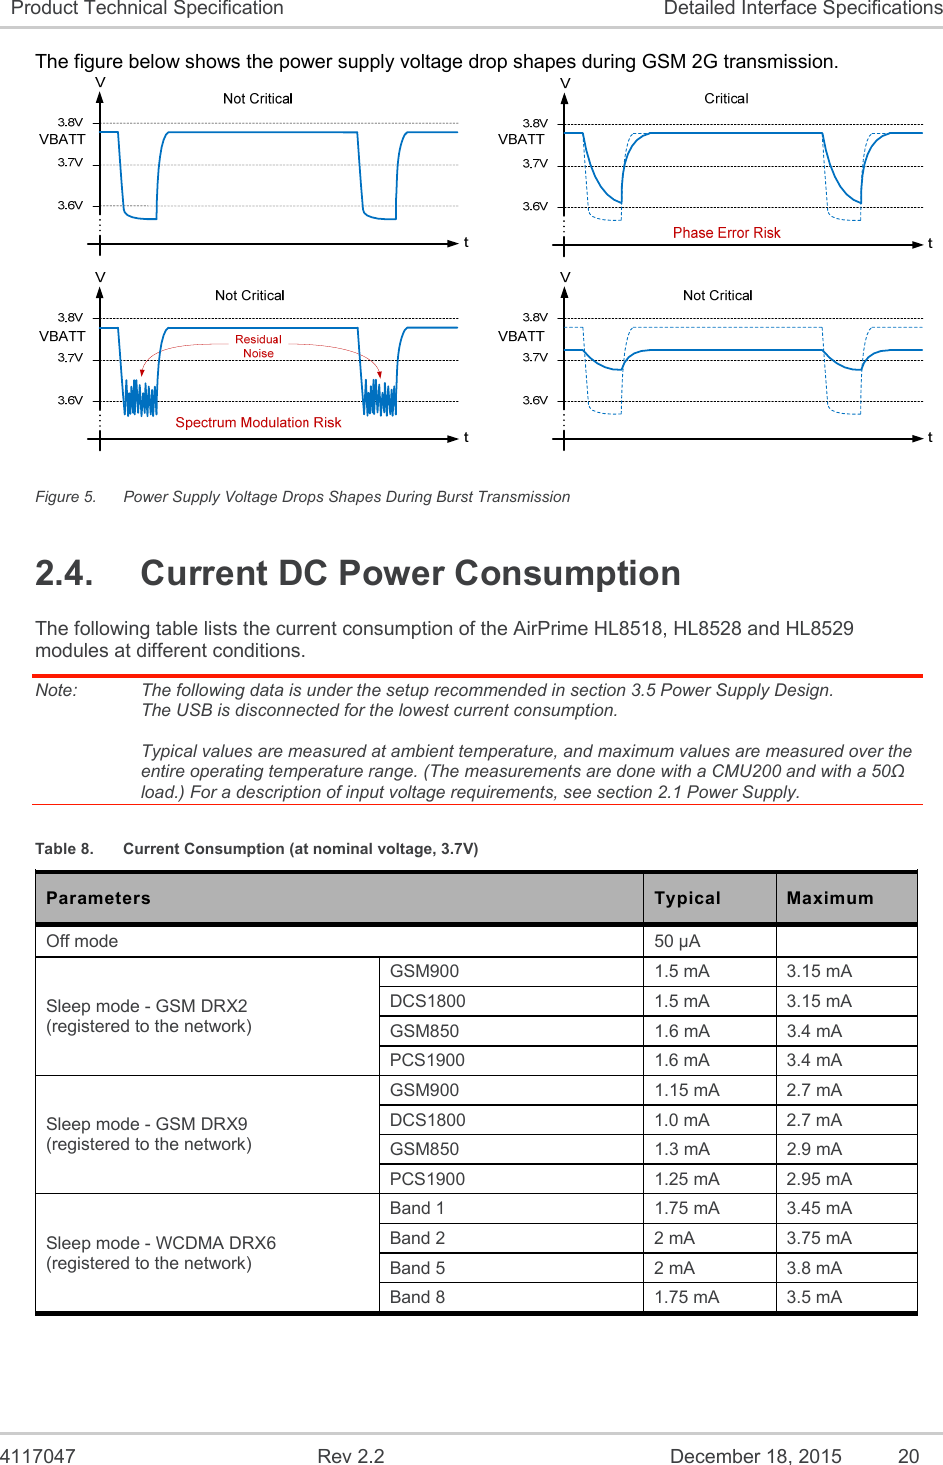  4117047  Rev 2.2  December 18, 2015  20 Product Technical Specification  Detailed Interface Specifications The figure below shows the power supply voltage drop shapes during GSM 2G transmission.  Figure 5.  Power Supply Voltage Drops Shapes During Burst Transmission 2.4.  Current DC Power Consumption The following table lists the current consumption of the AirPrime HL8518, HL8528 and HL8529 modules at different conditions. Note:   The following data is under the setup recommended in section 3.5 Power Supply Design. The USB is disconnected for the lowest current consumption.  Typical values are measured at ambient temperature, and maximum values are measured over the entire operating temperature range. (The measurements are done with a CMU200 and with a 50Ω load.) For a description of input voltage requirements, see section 2.1 Power Supply. Table 8.  Current Consumption (at nominal voltage, 3.7V) Parameters  Typical  Maximum Off mode  50 µA   Sleep mode - GSM DRX2 (registered to the network) GSM900  1.5 mA  3.15 mA DCS1800  1.5 mA  3.15 mA GSM850  1.6 mA  3.4 mA PCS1900  1.6 mA  3.4 mA Sleep mode - GSM DRX9 (registered to the network) GSM900  1.15 mA  2.7 mA DCS1800  1.0 mA  2.7 mA GSM850  1.3 mA  2.9 mA PCS1900  1.25 mA  2.95 mA Sleep mode - WCDMA DRX6 (registered to the network) Band 1  1.75 mA  3.45 mA Band 2  2 mA  3.75 mA Band 5  2 mA  3.8 mA Band 8  1.75 mA  3.5 mA 